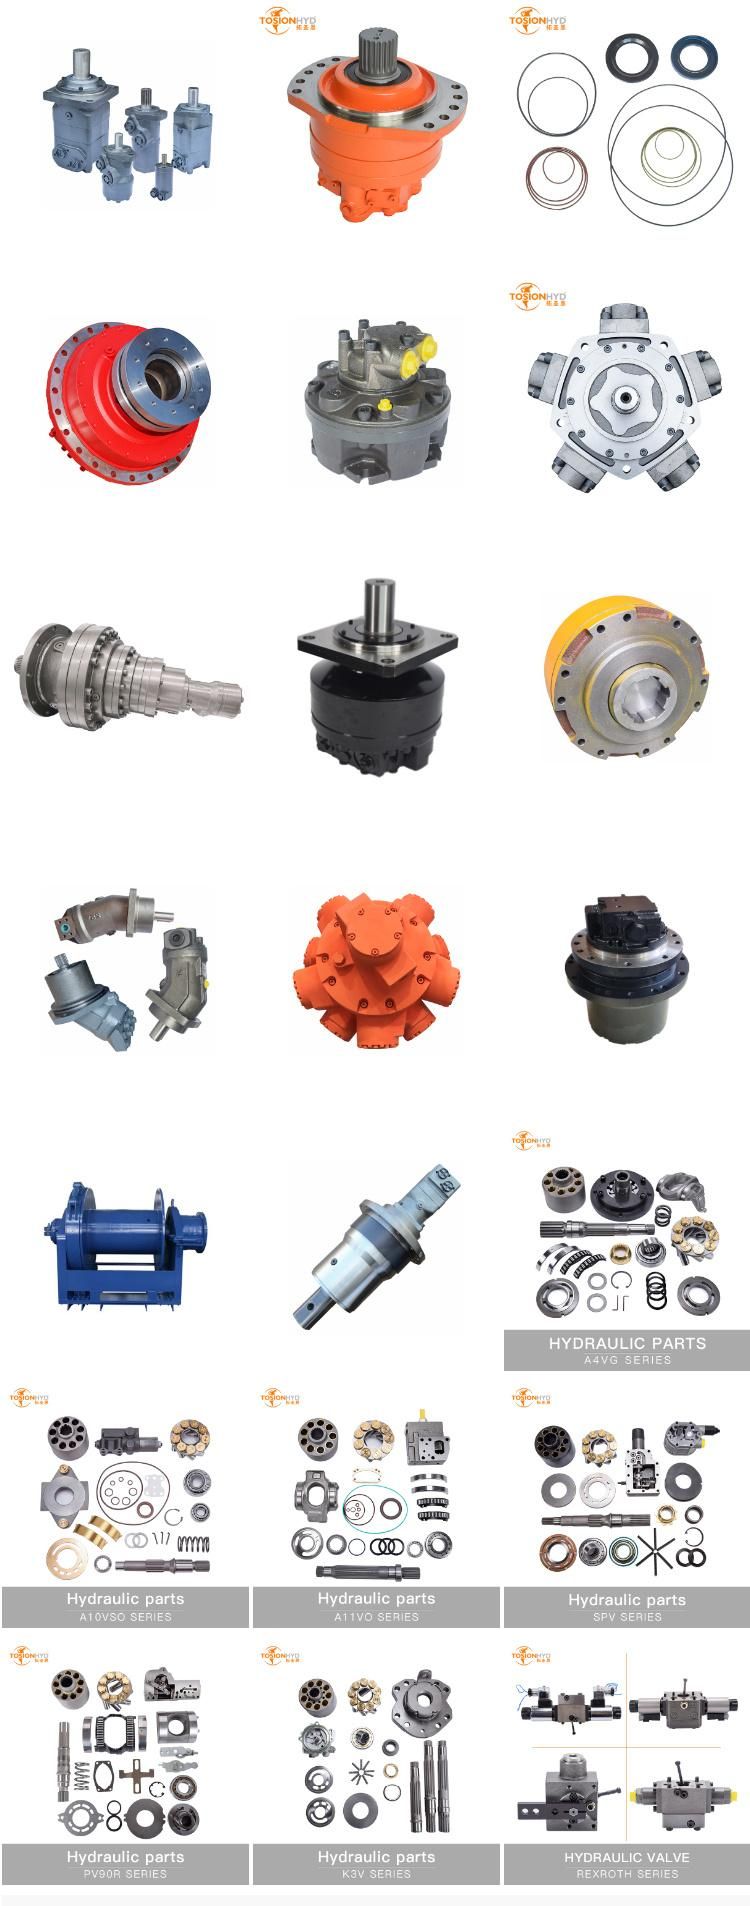 A6ve 250 Hydraulic Motor Parts with Rexroth Spare Repair Kits